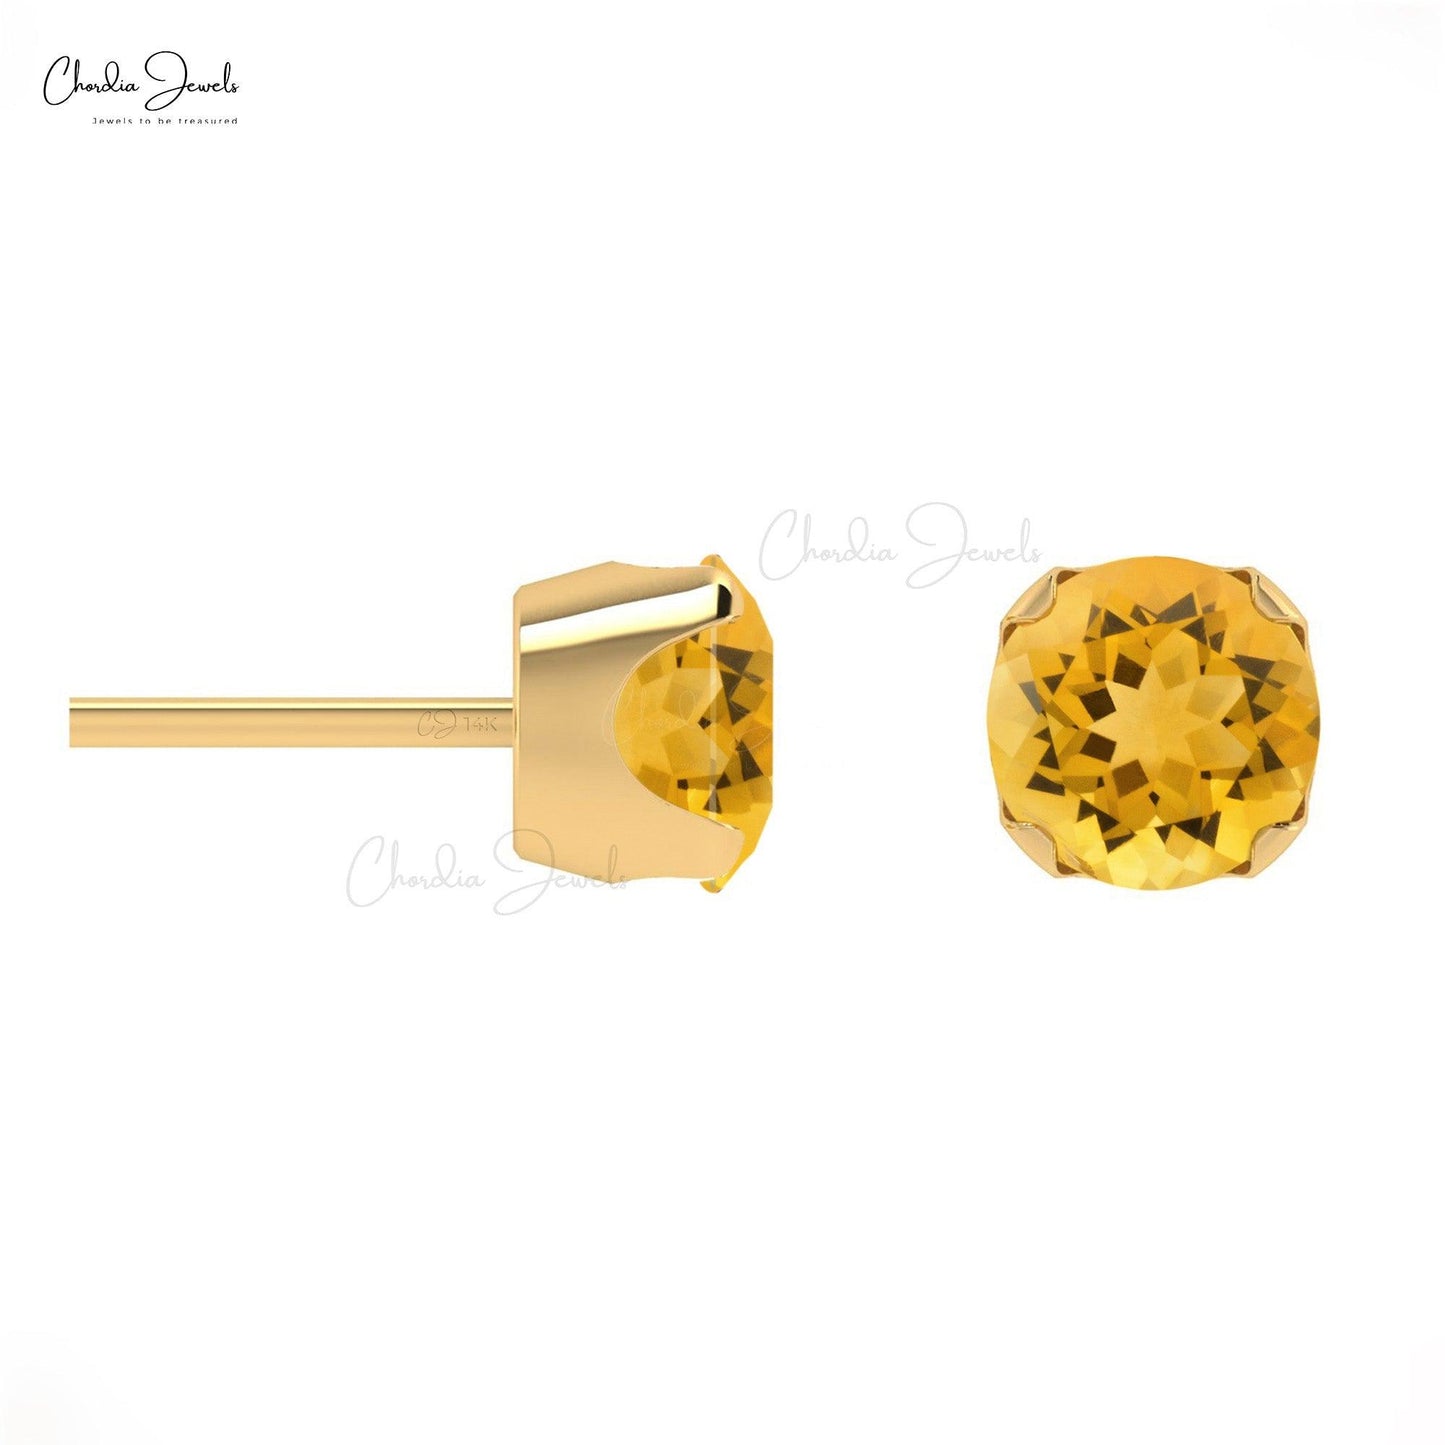 Load image into Gallery viewer, 0.6 Carat Genuine Citrine Round Gemstone Earring 14k Solid Gold Studs - Chordia Jewels
